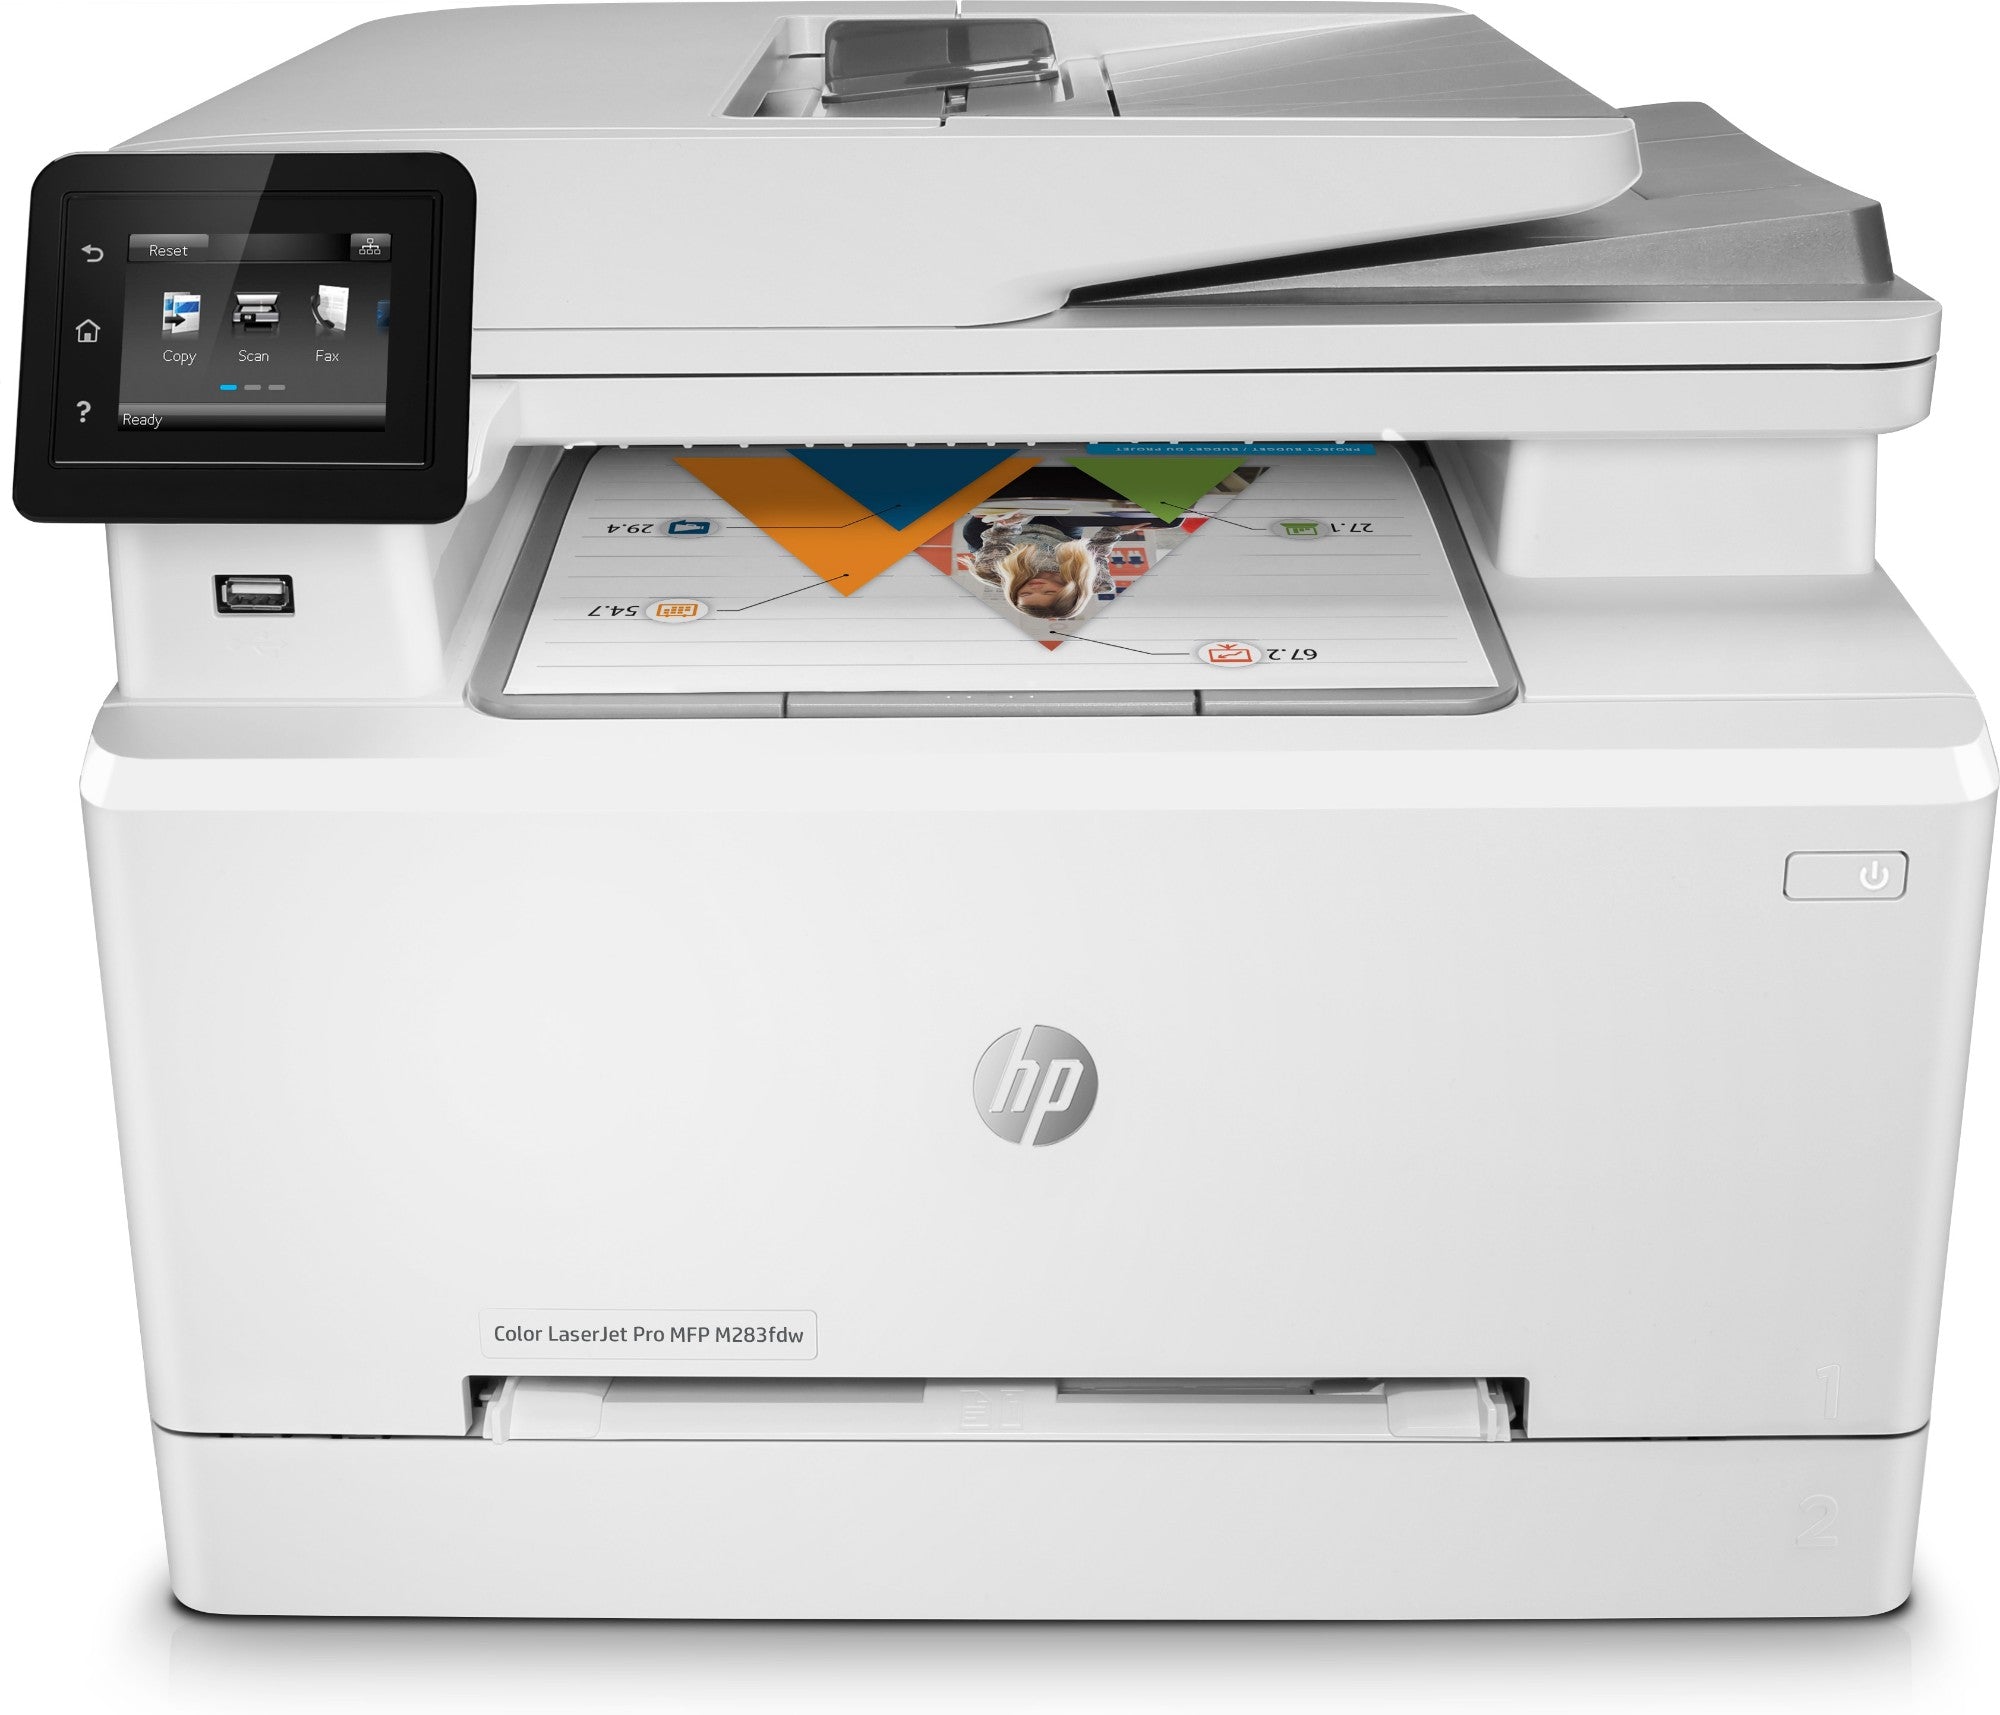 HP Color Laserjet Pro Mfp M283Fdw, Print, Copy, Scan, Fax, Front-Facing USB Printing; Scan To Email; Two-Sided Printing; 50-Sheet Uncurled Adf-(7KW75A#B19)